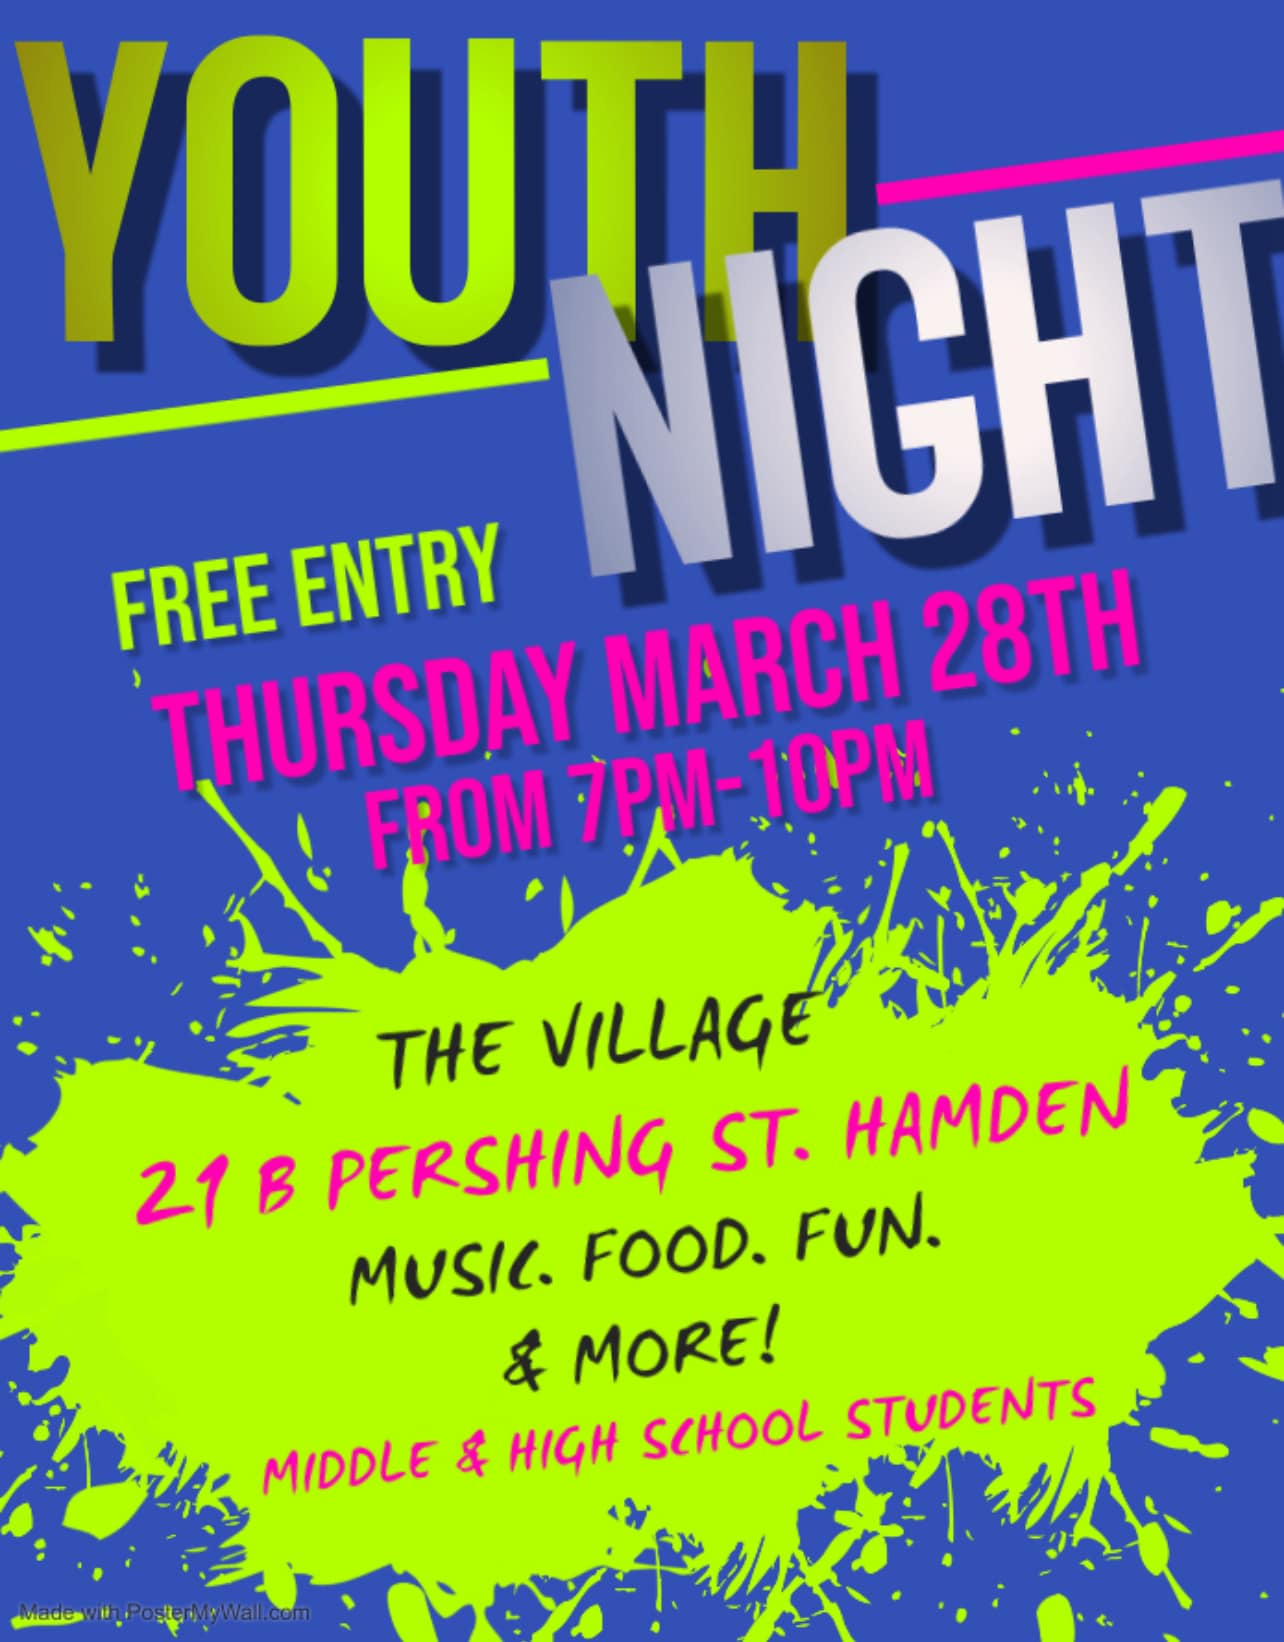 May be an image of text that says 'YOUTH NIGHT FREE ENTRY THURSDAY 7PM-10PM 10PM MARCH 28TH FROM THE VILLAG 21 B PERSHING ST. HAMDEN MUSIC. FOOD. FUN. & MORE! MIDDLE & HIGH SCHOOL STUDENTS'